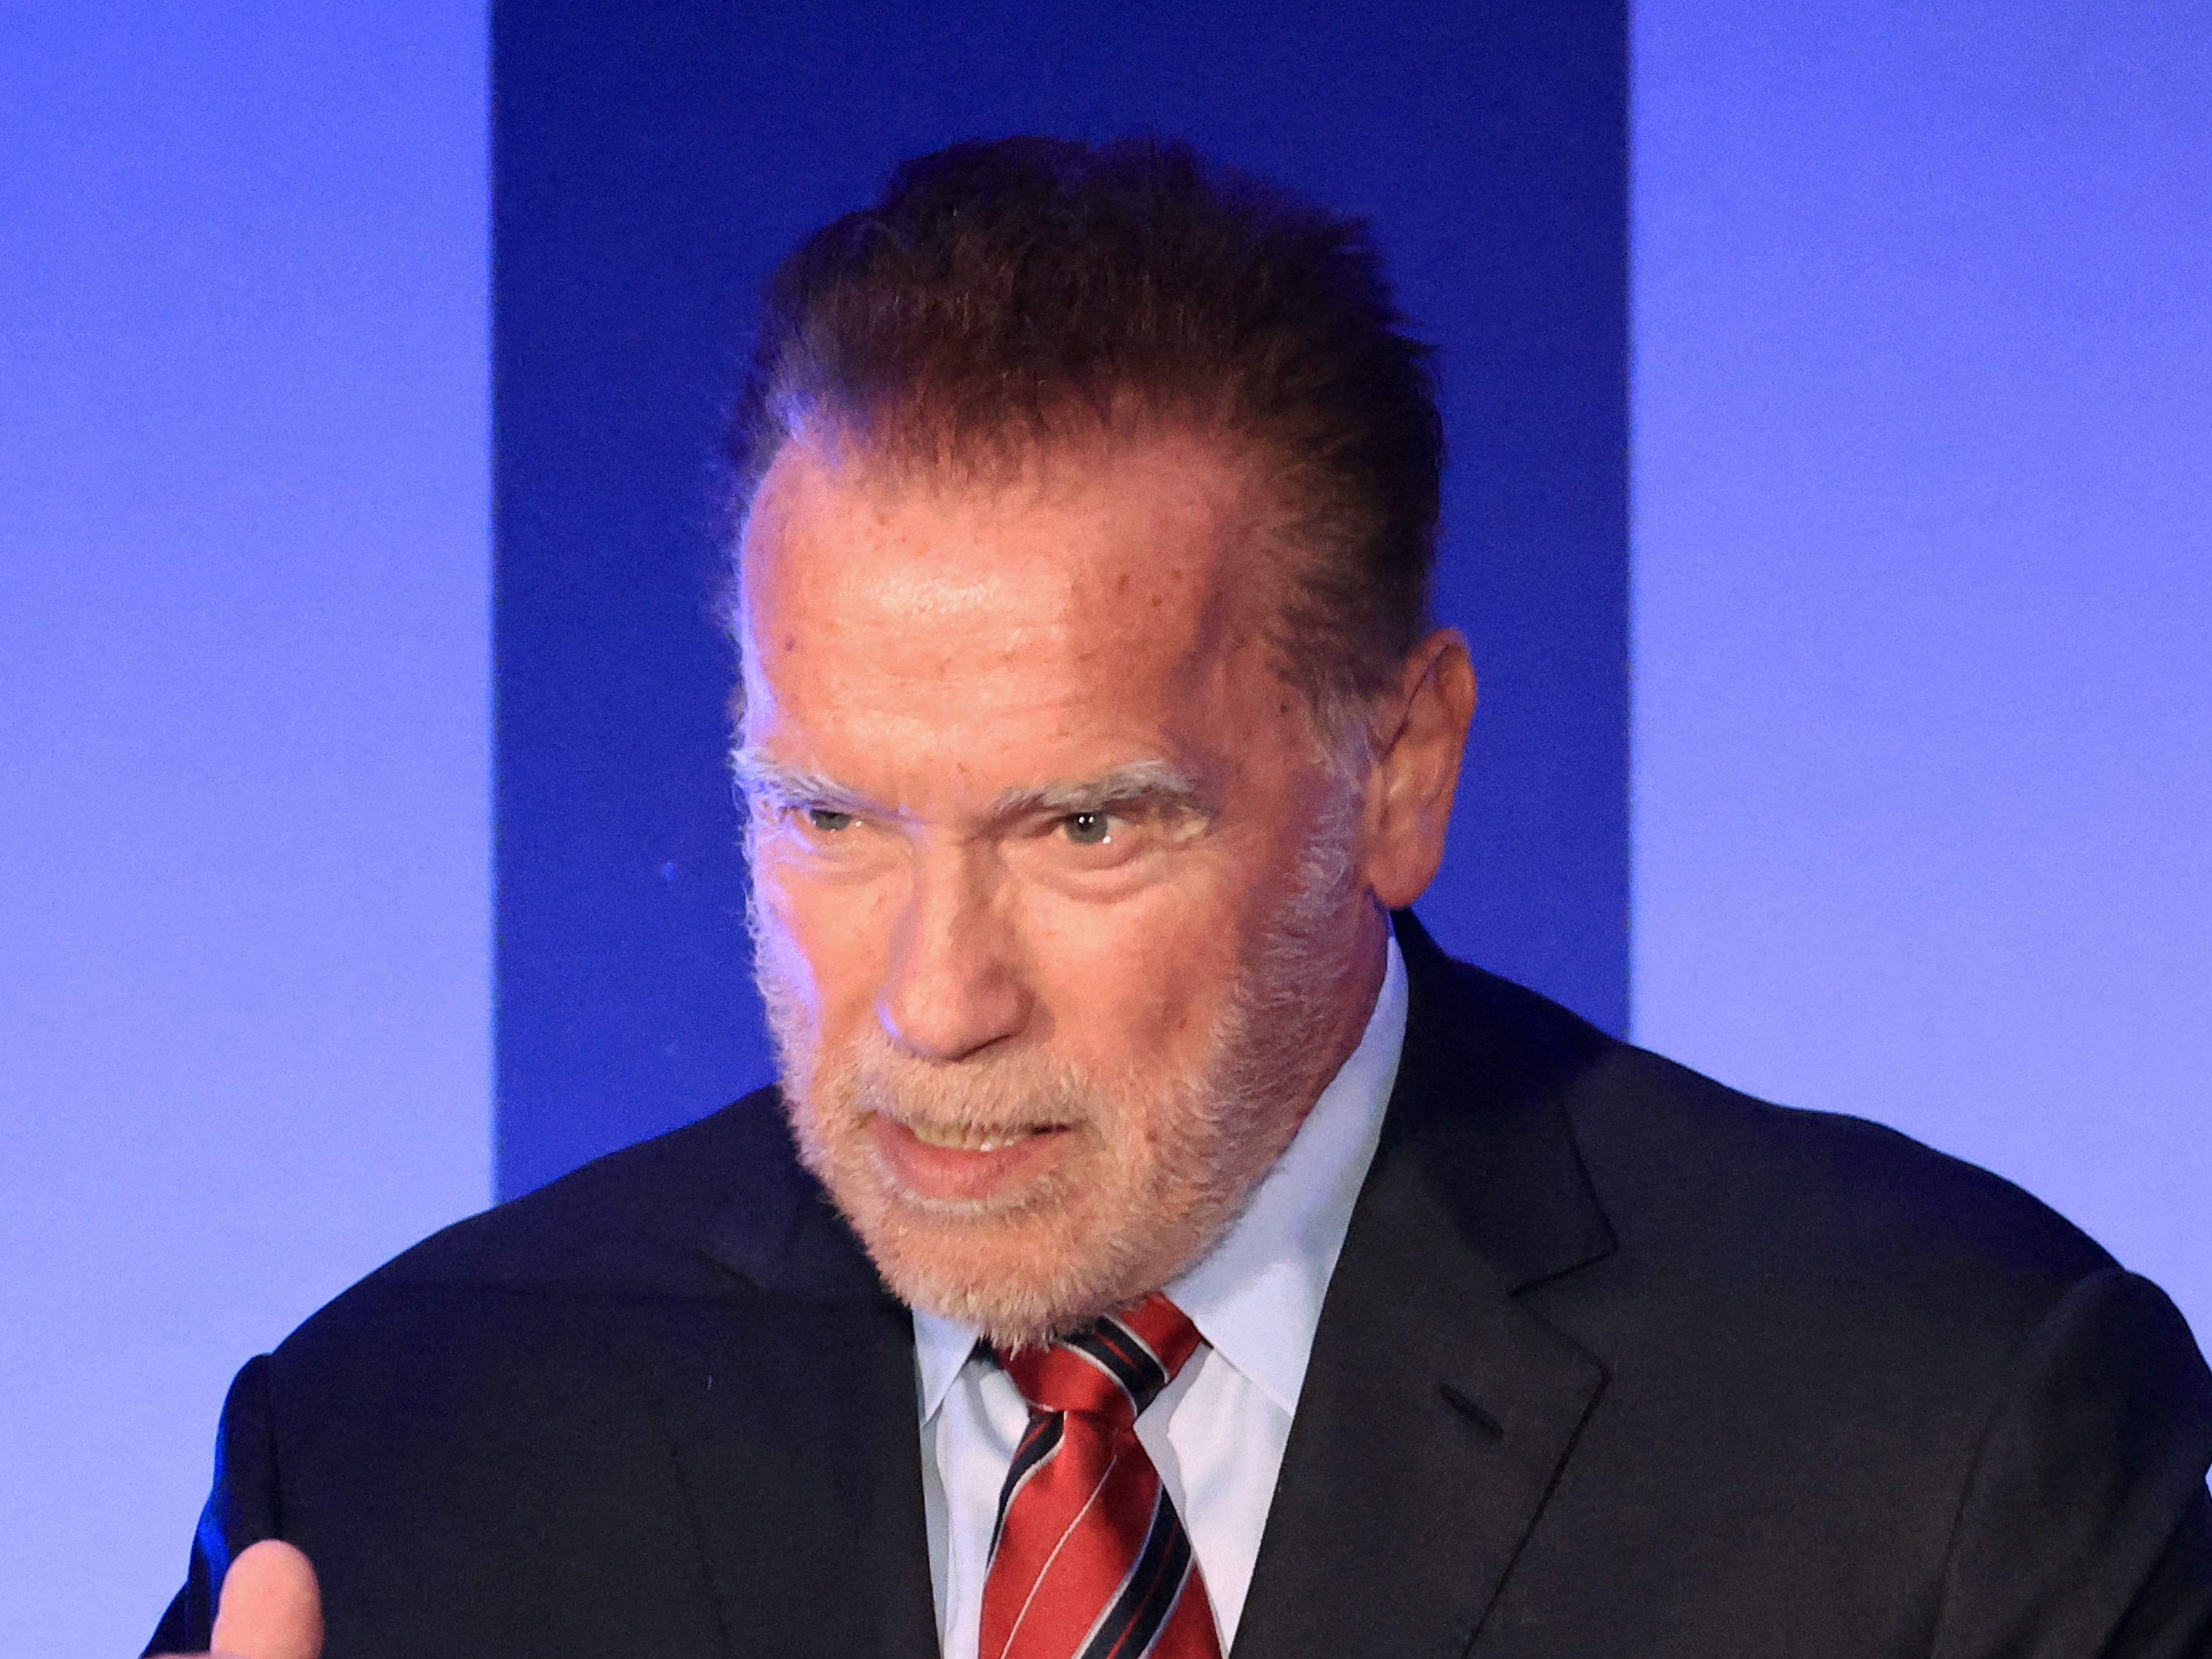 Arnold Schwarzenegger said he was threatened with handcuffs while being detained at Munich airport